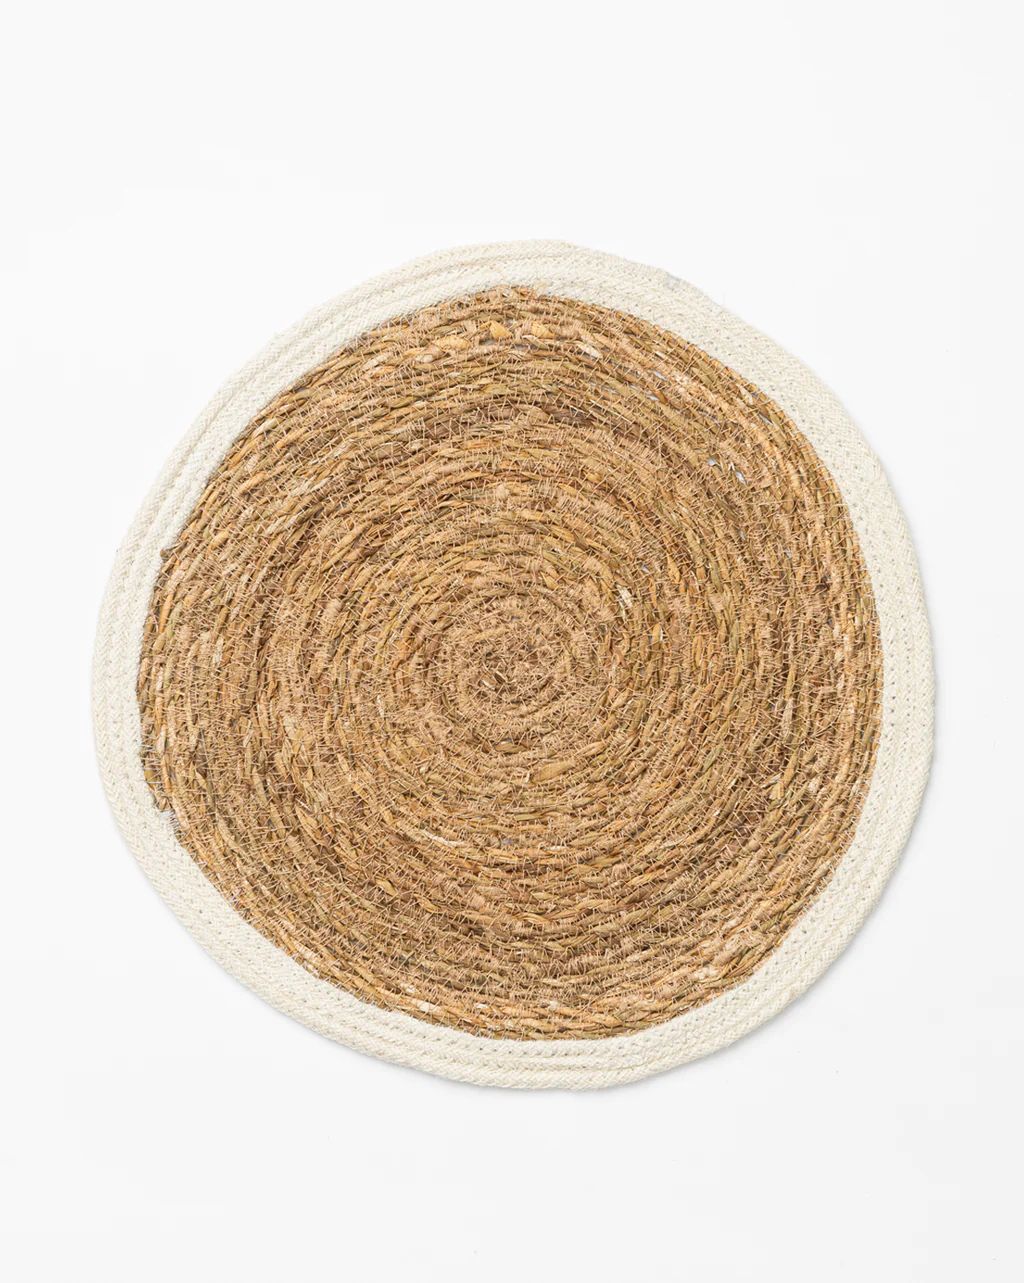 Bordered Jute Placemat | McGee & Co.